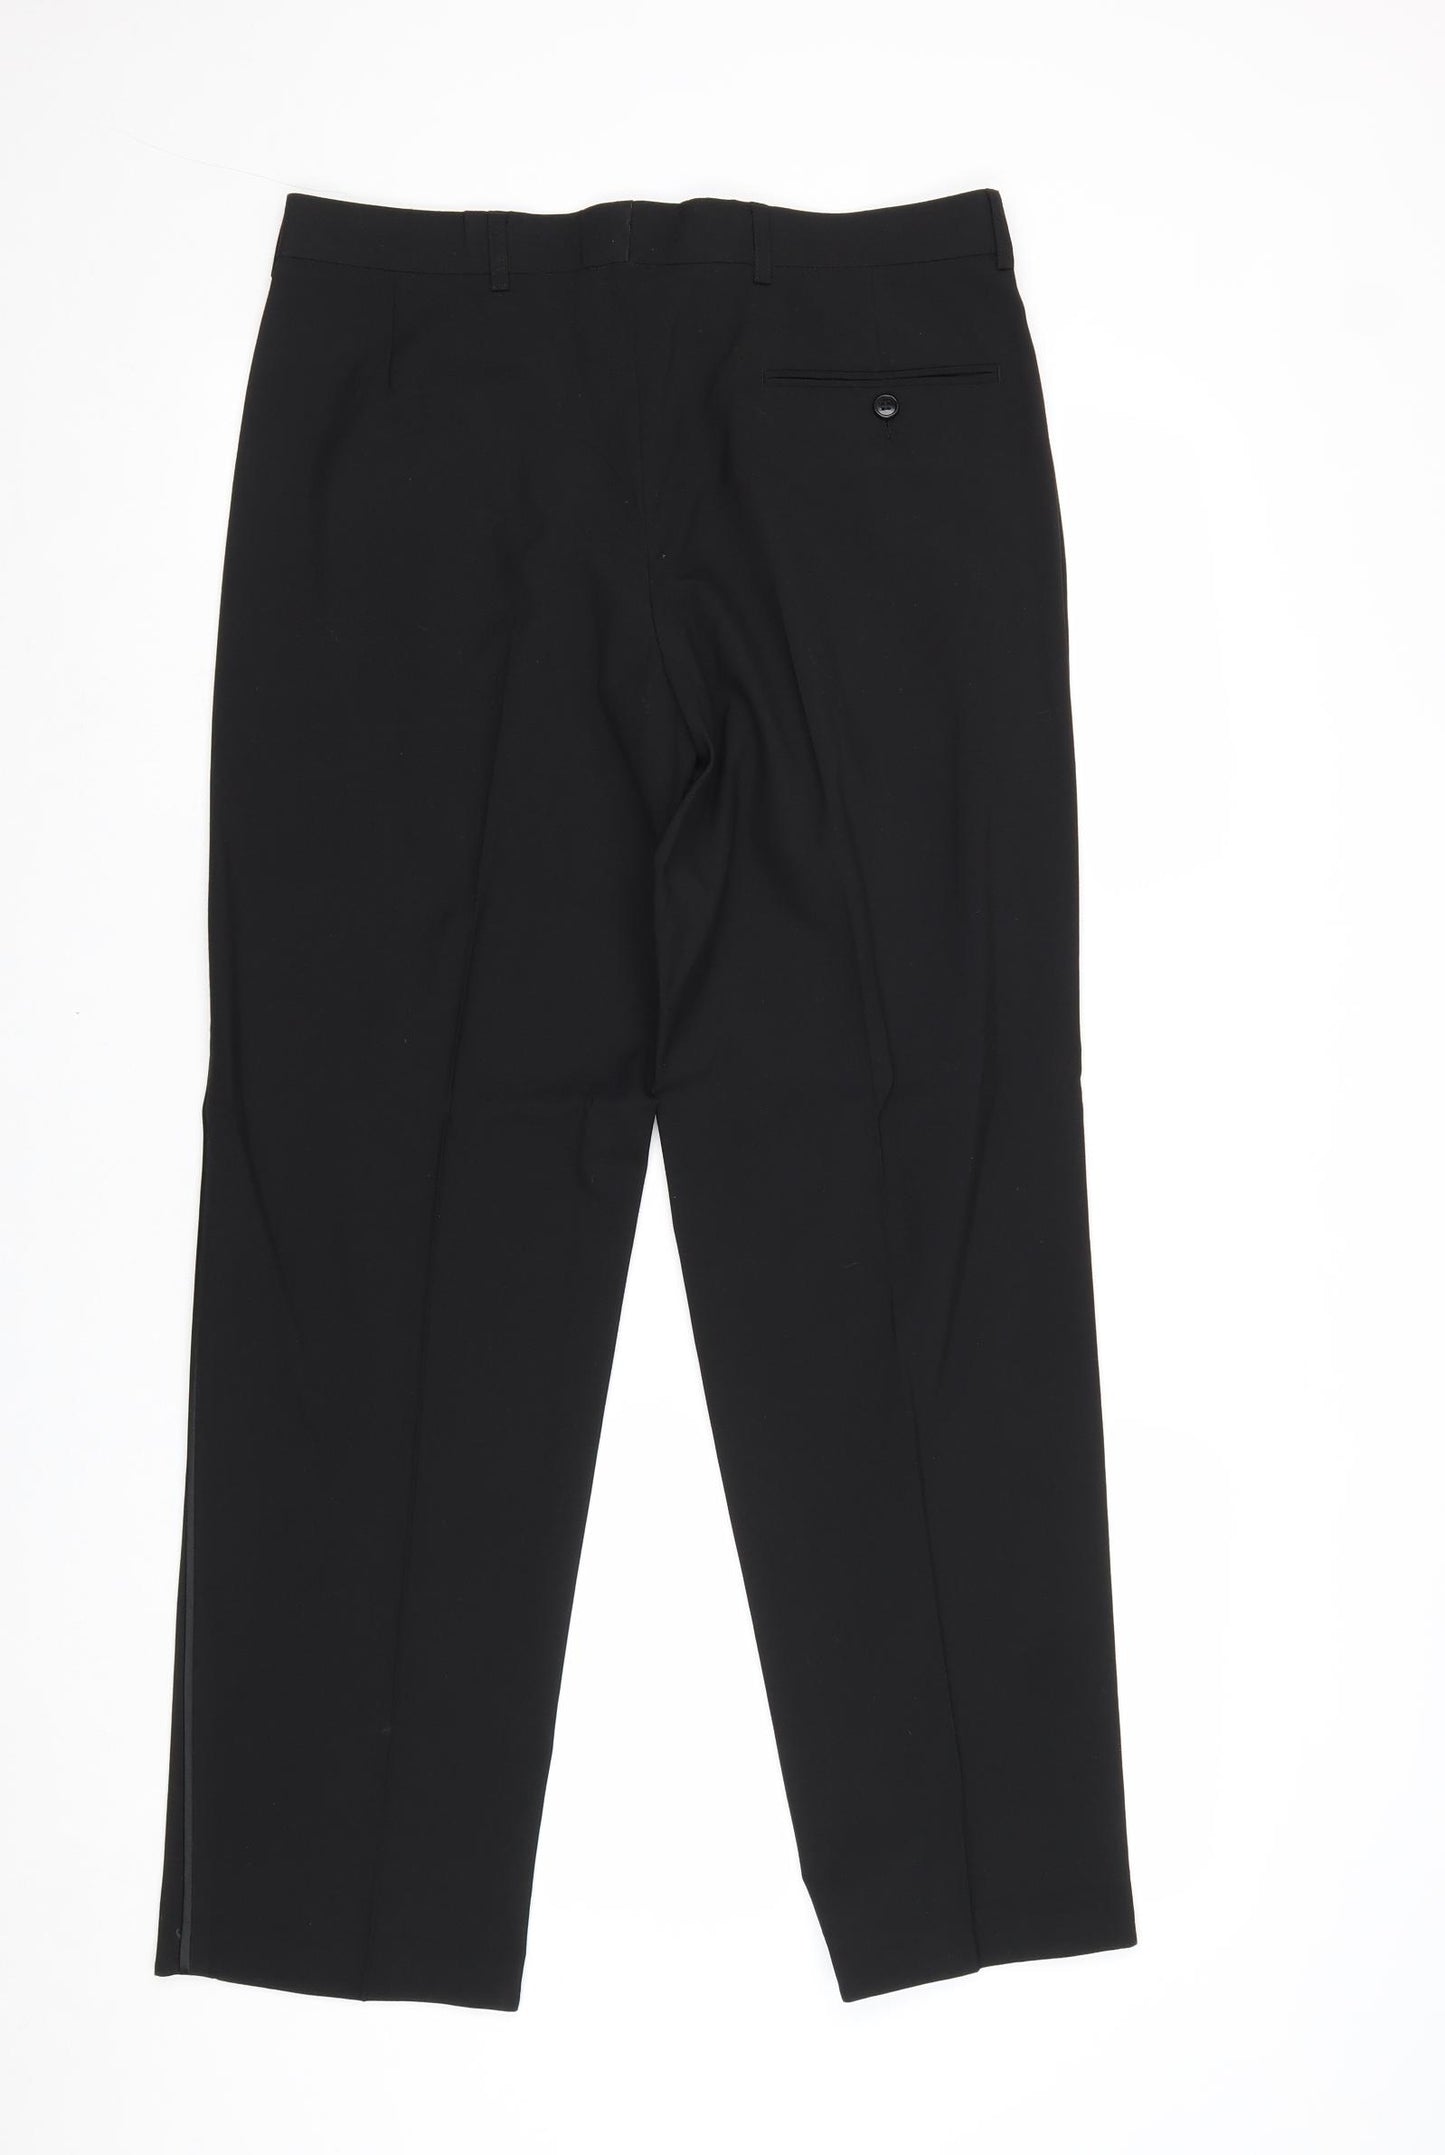 Marks and Spencer Mens Black Polyester Trousers Size 30 in Regular Zip